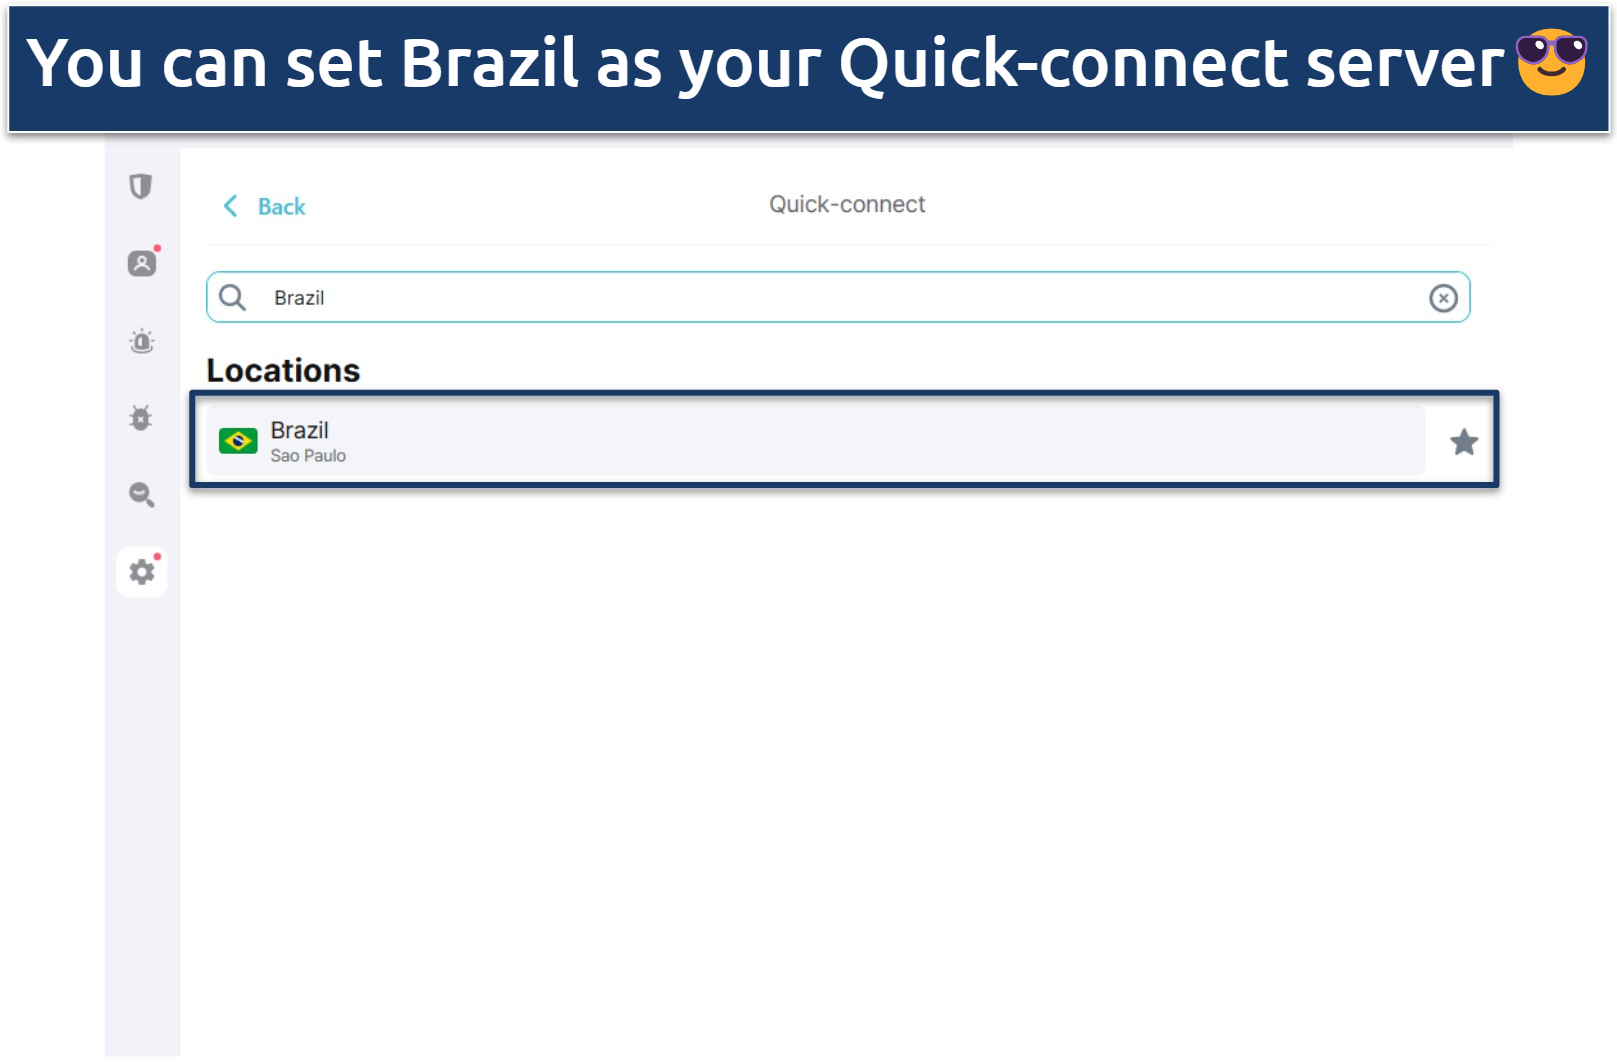 A screenshot of Surfshark's Quick-connect settings with the Brazil server highlighted.